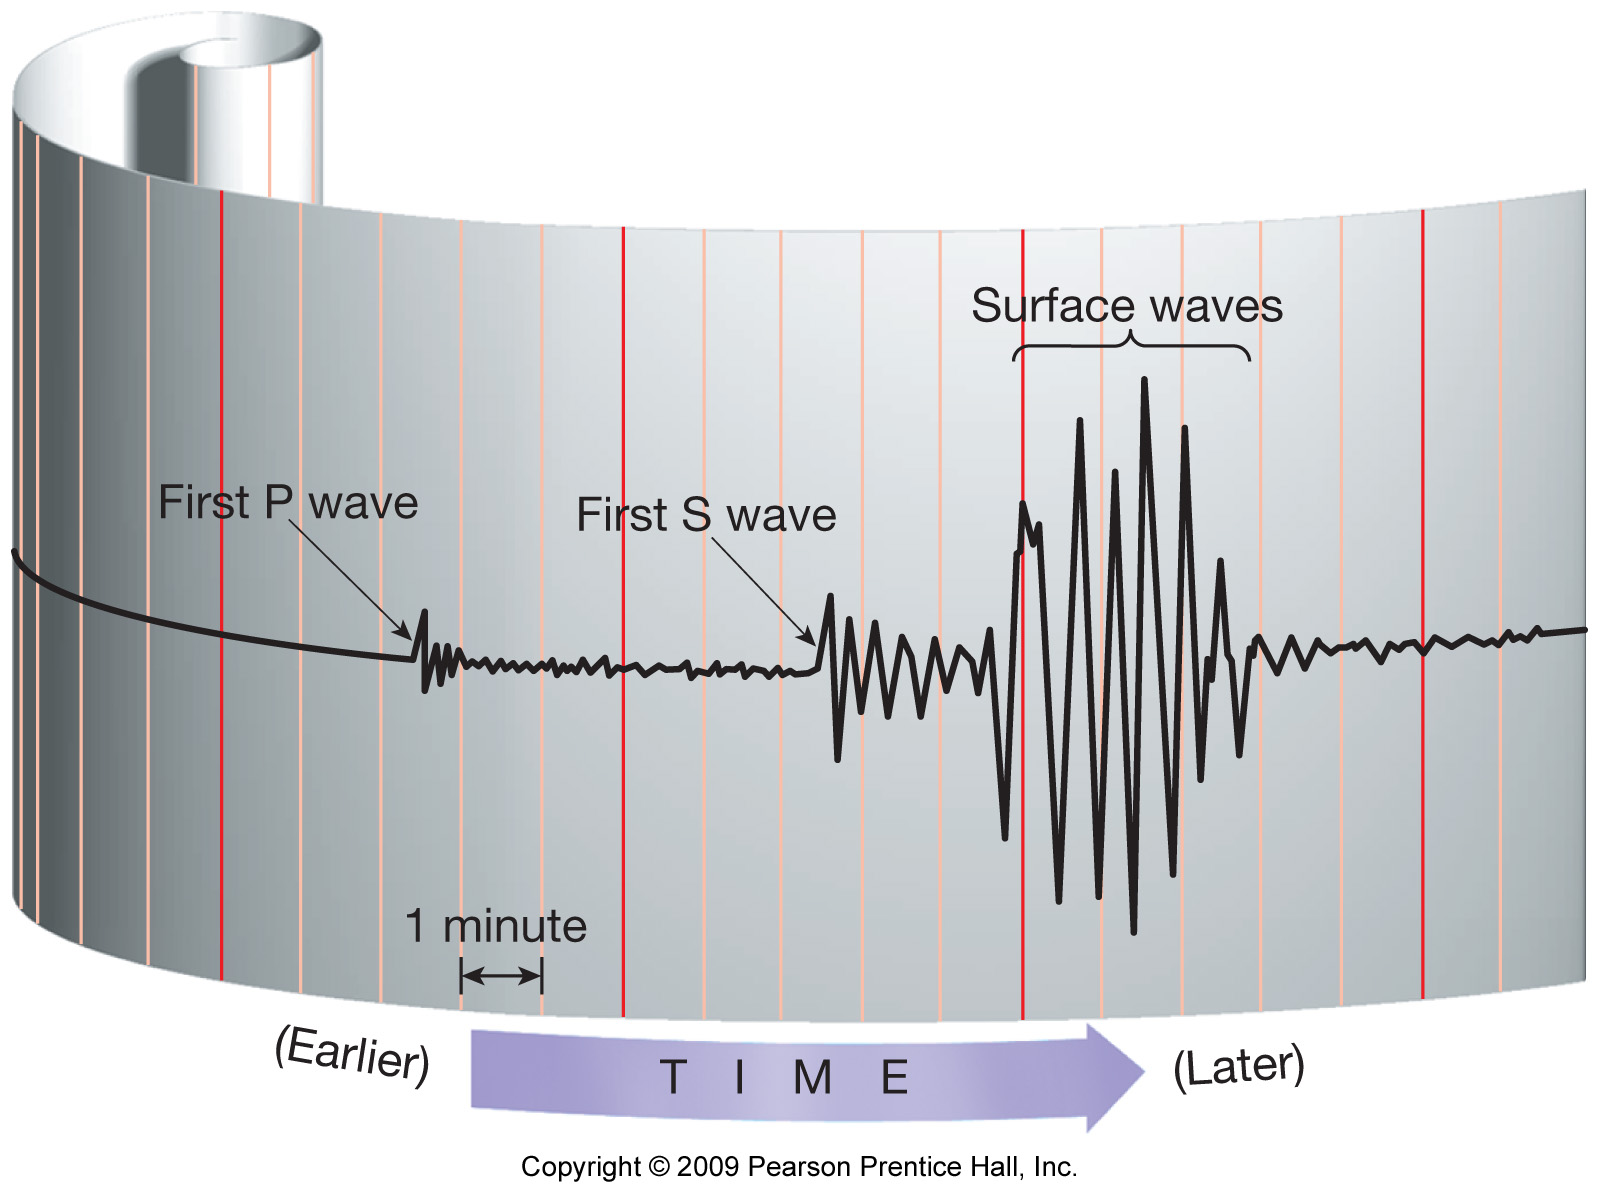 FIGURE 1 BACKGROUND THE FOCUS OF AN EARTHQUAKE IS